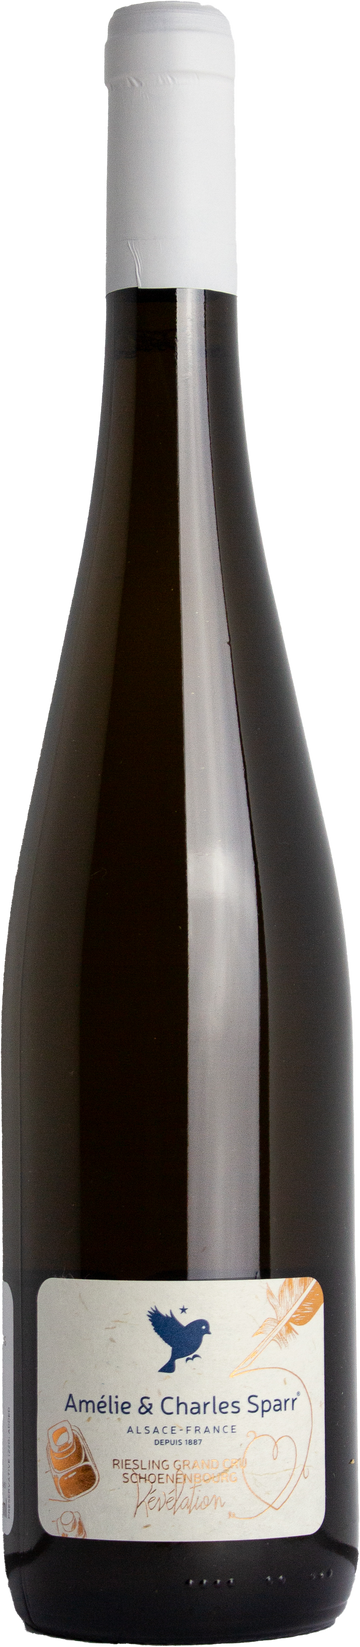 Domaine Charles Sparr - Riesling Grand Cru Schoenenbourg 